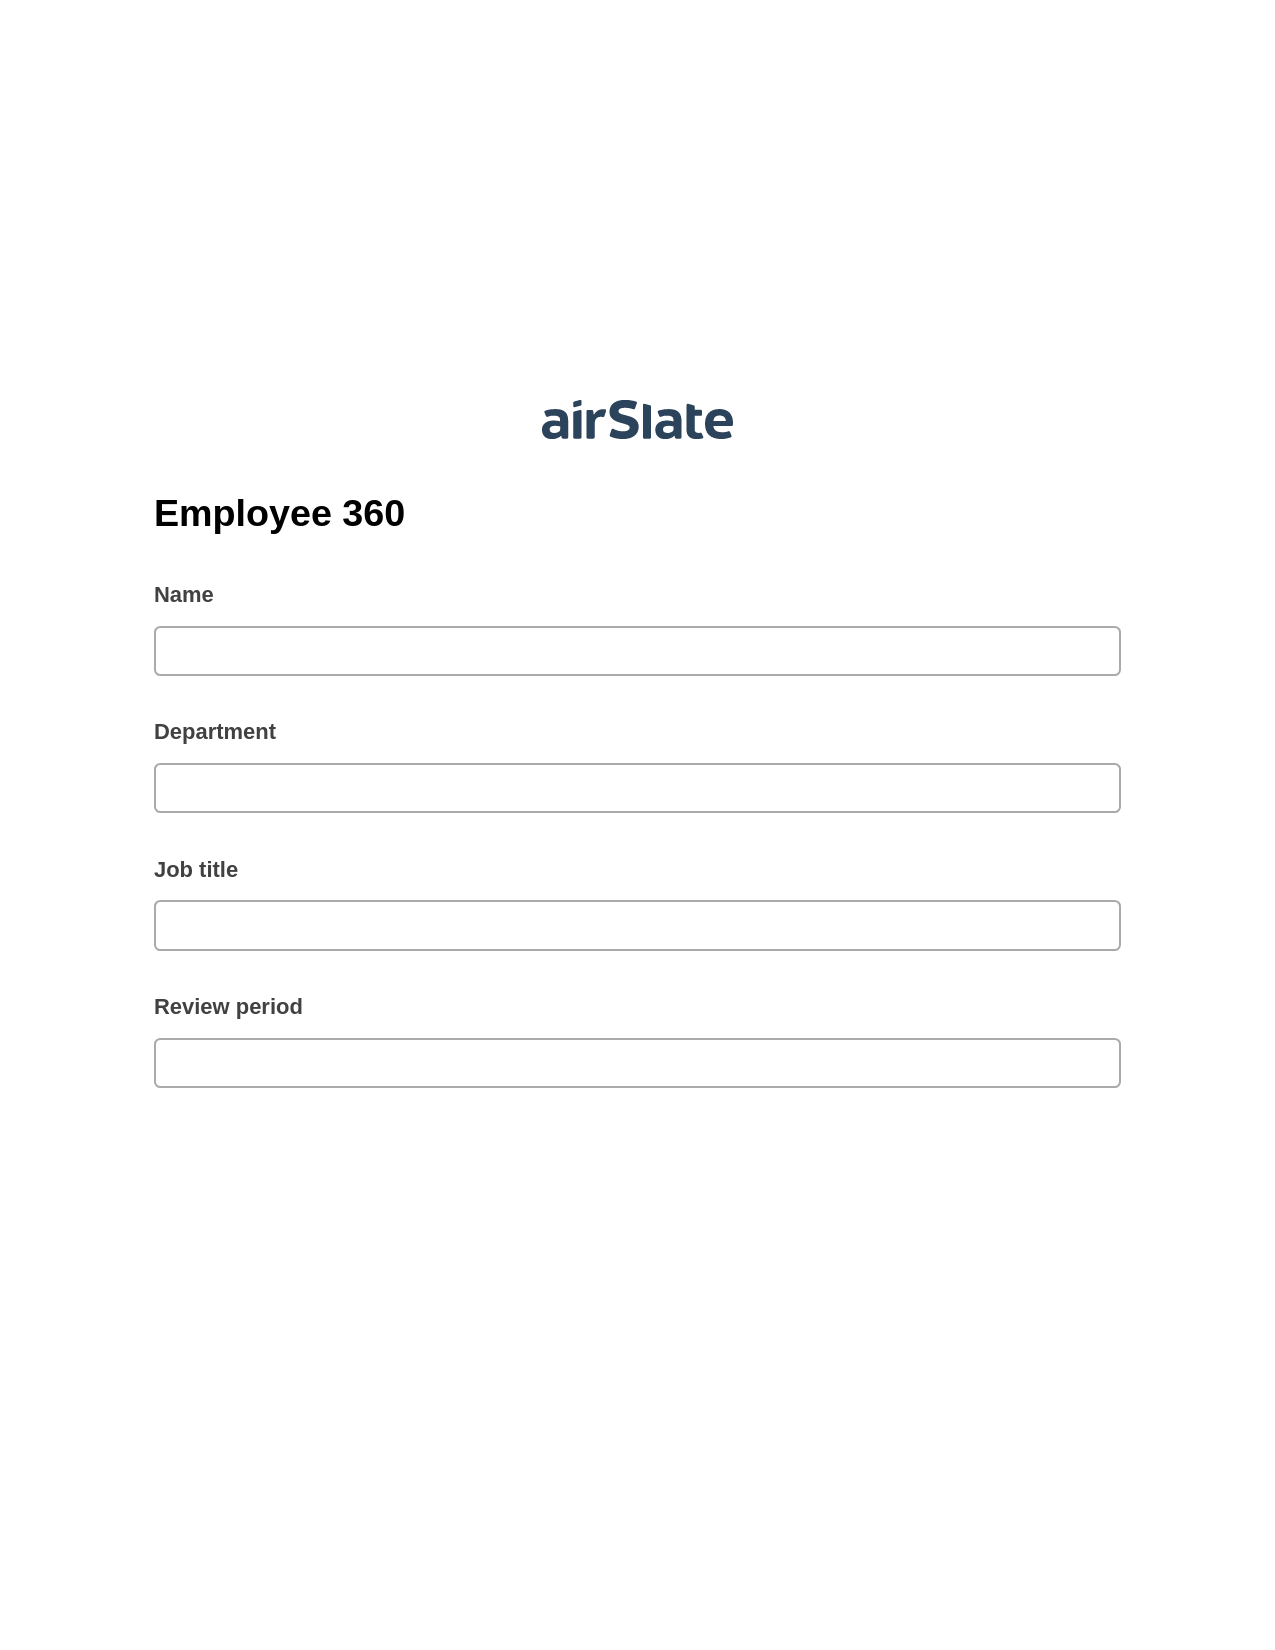 Multirole Employee 360 Pre-fill from MS Dynamics 365 Records, Remove Tags From Slate Bot, Archive to OneDrive Bot